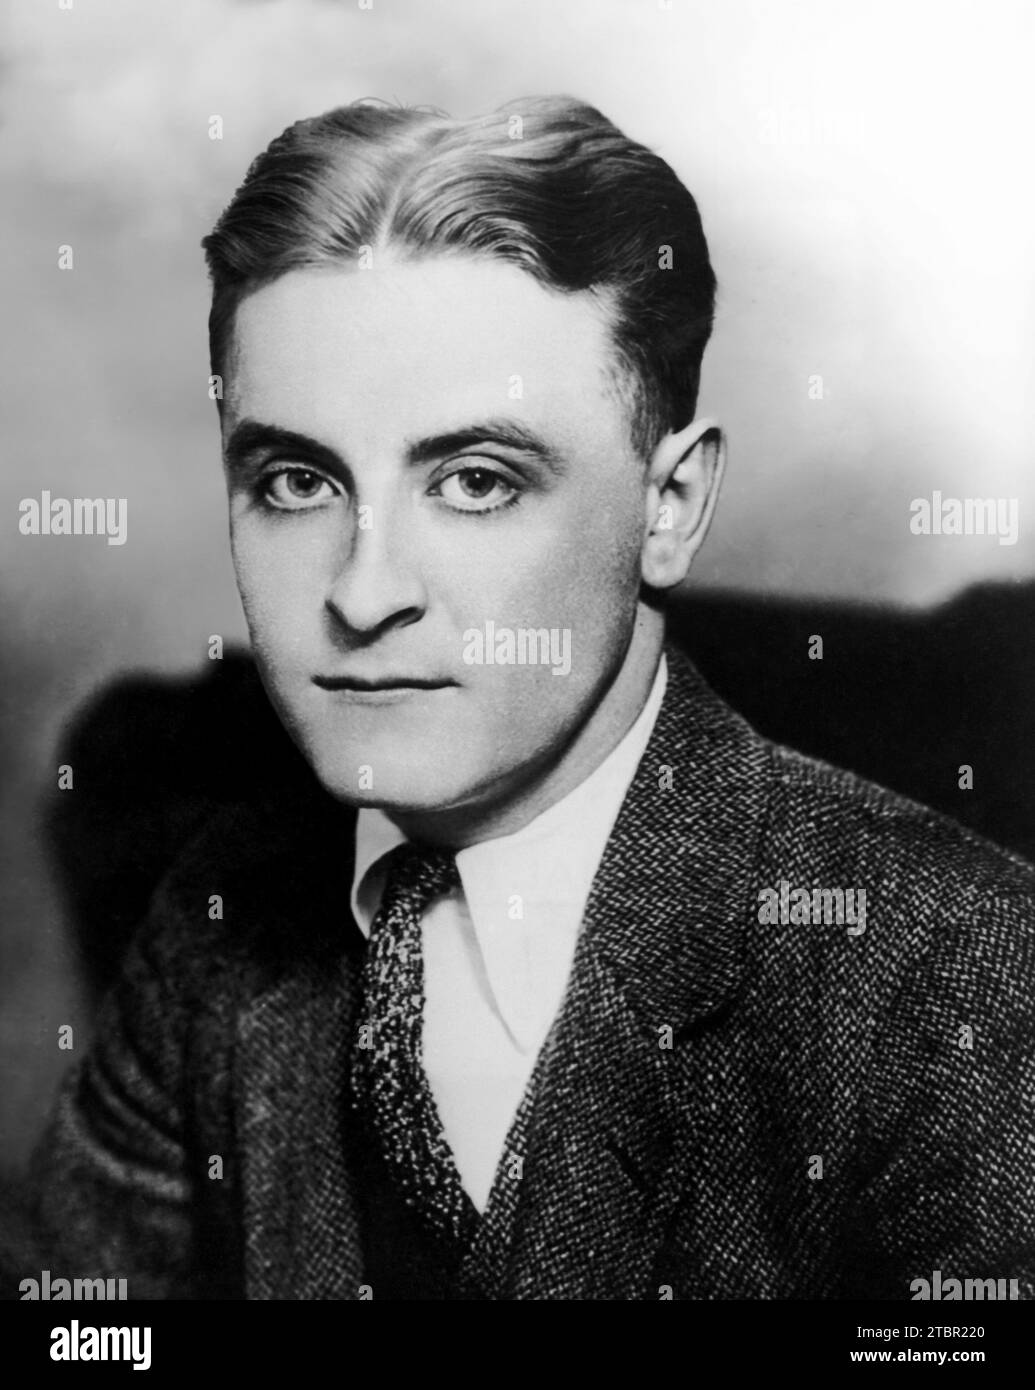 Photograph of F. Scott Fitzgerald published in The World's Work (June 1921 issue). Stock Photo